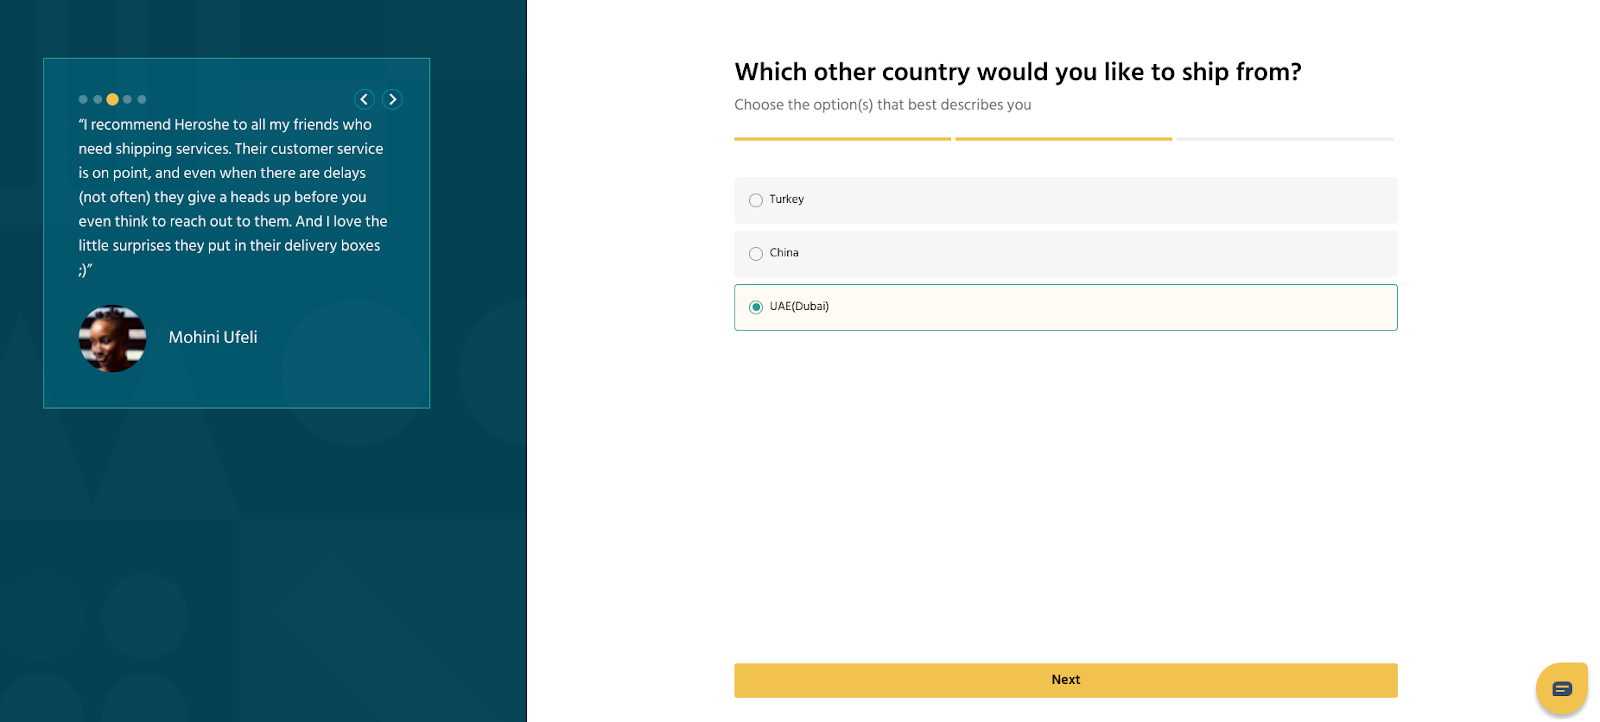 Which other country would you like to ship from?